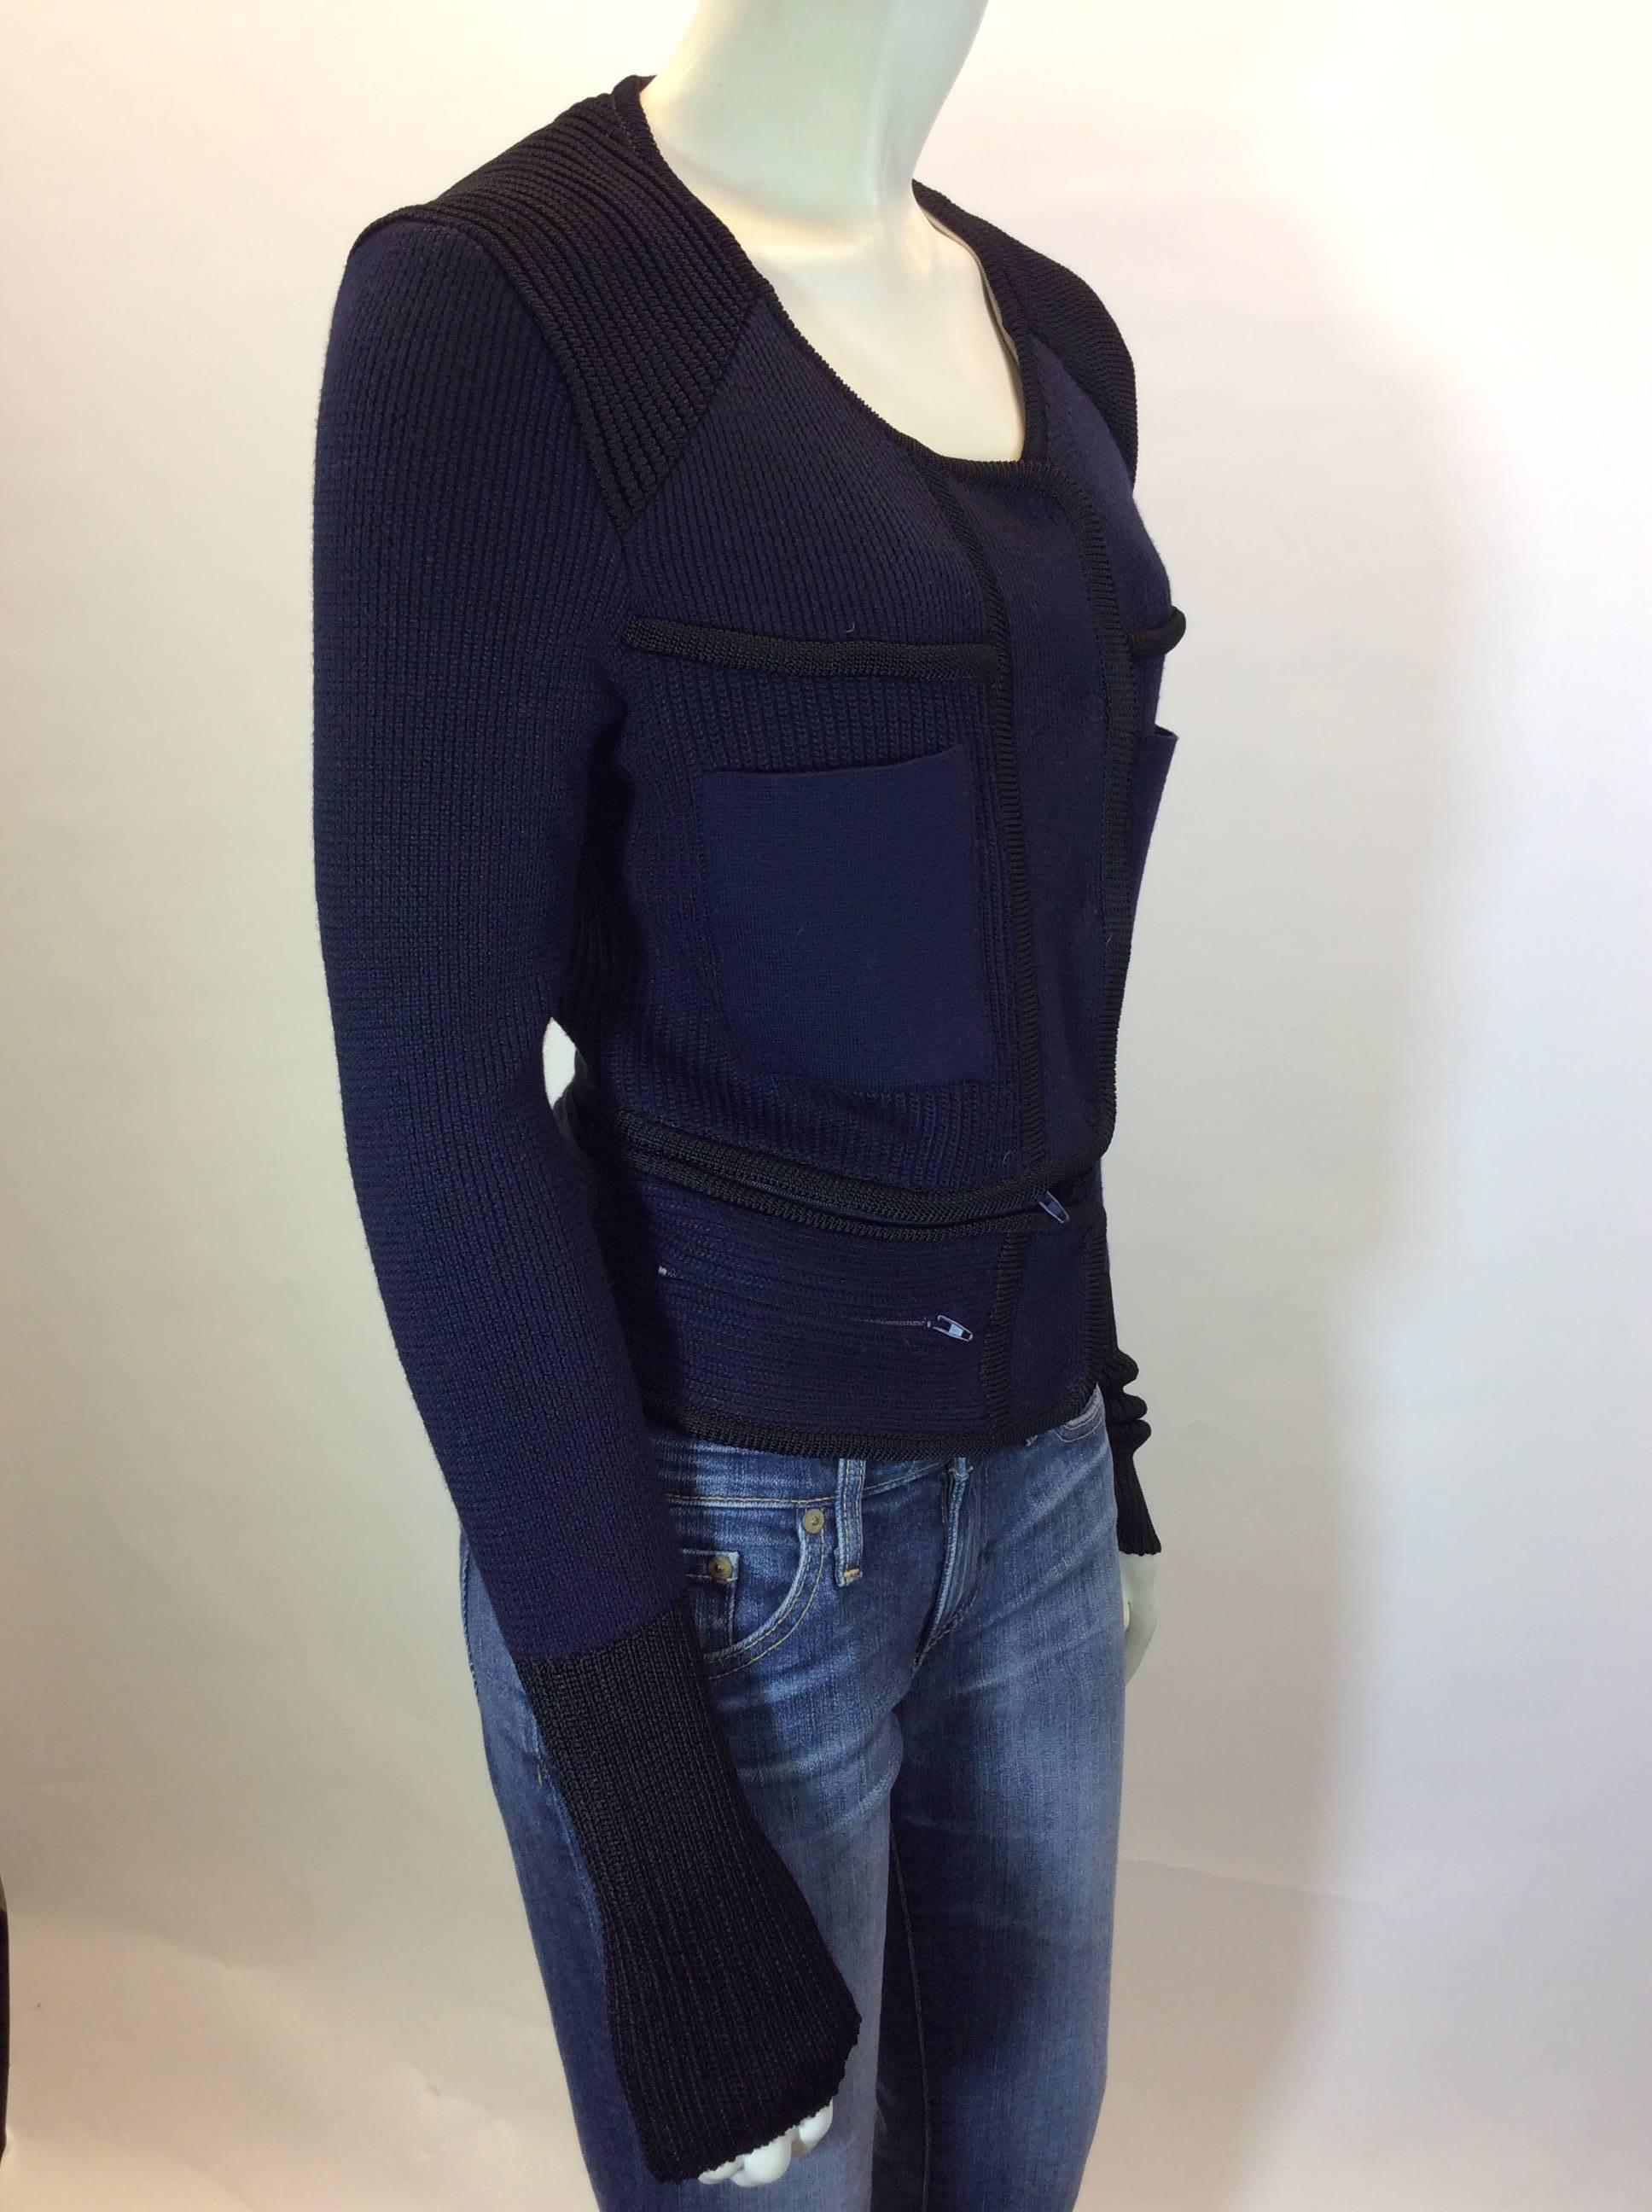 Navy and Black Cardigan
Zipper Removable Bottom Piece (32" x 5")
Snap Buttons up front for Closure
Single Pocket on Either Side
EU 40 
28" Inch Sleeve Length